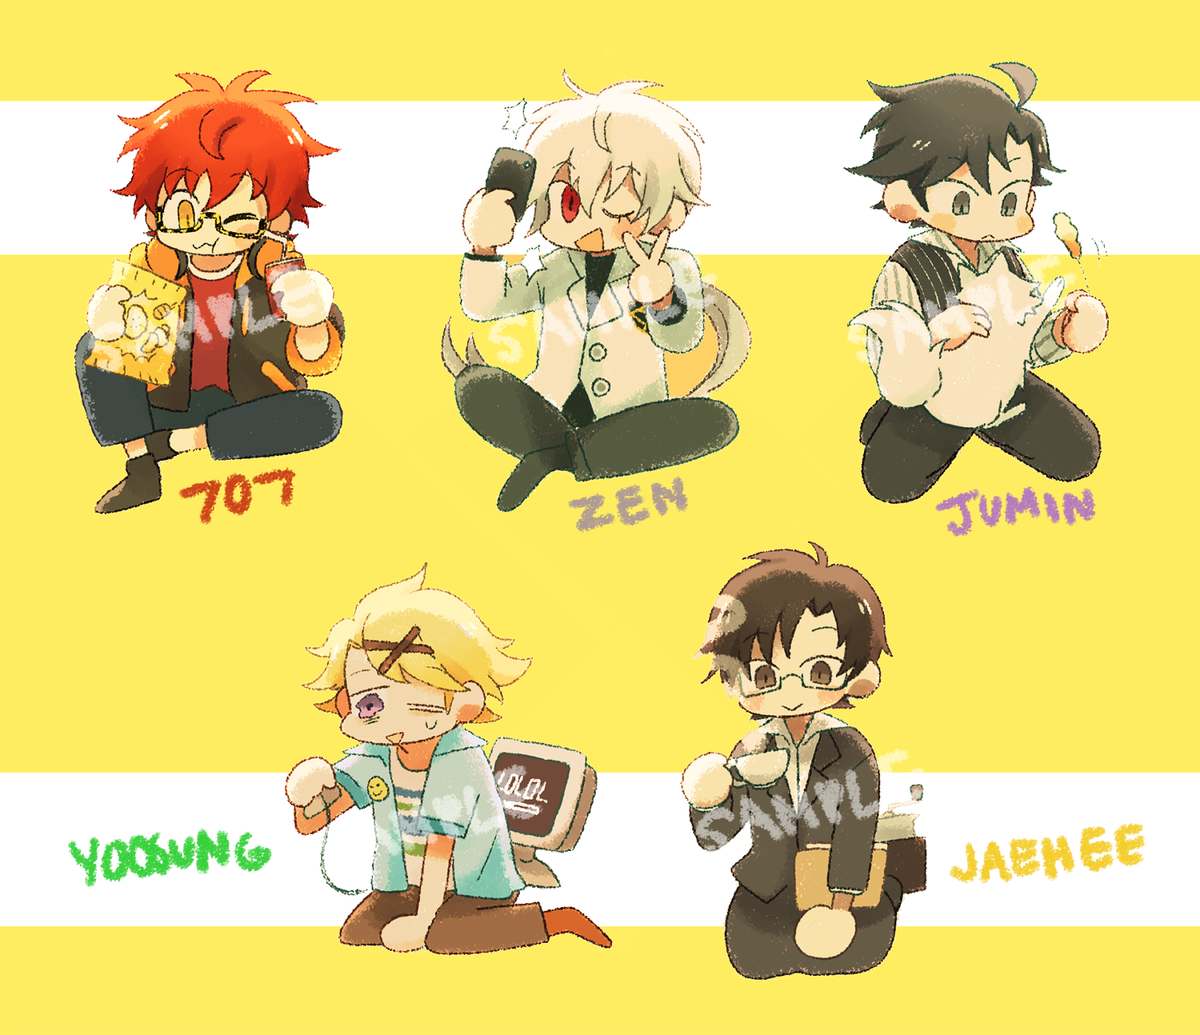 reetz on Twitter: "opening PREORDERS for mystic messenger acrylic charms!!  preorder here until SEP 27th!!: https://t.co/0KpGAu6K5I  https://t.co/pEpAKMJE0r" / Twitter